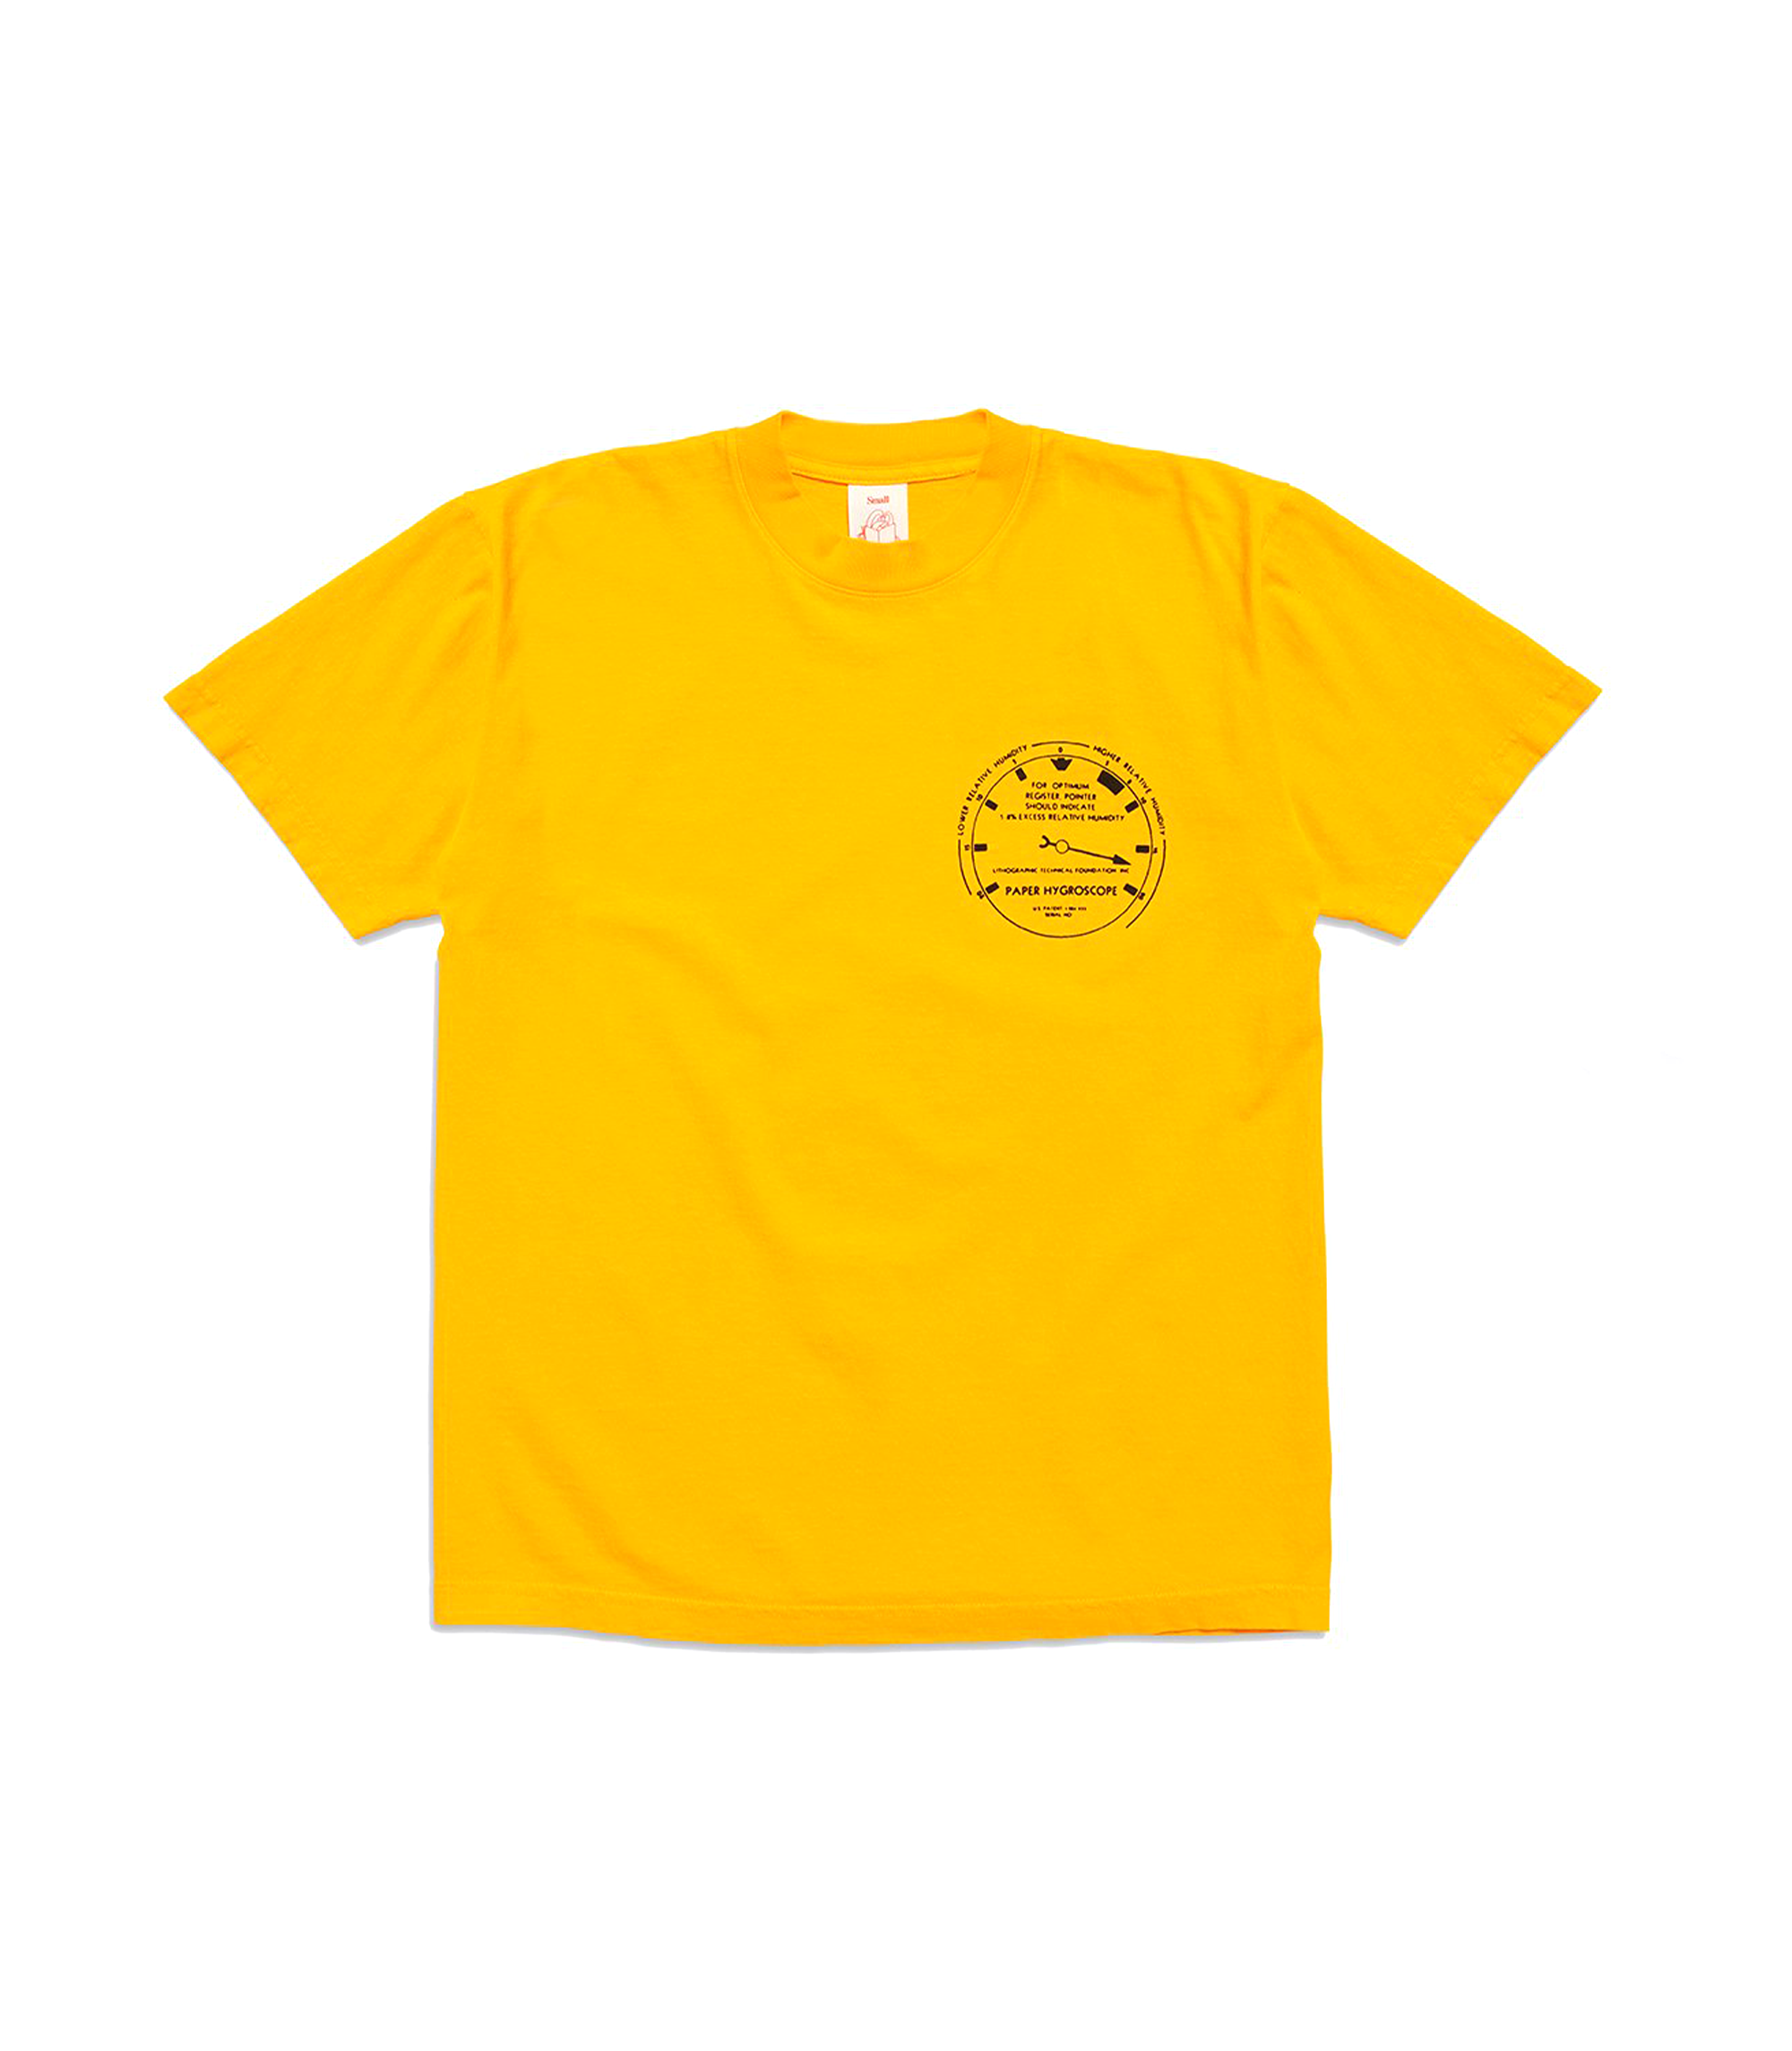 Delivery Pile T-Shirt - Yellow